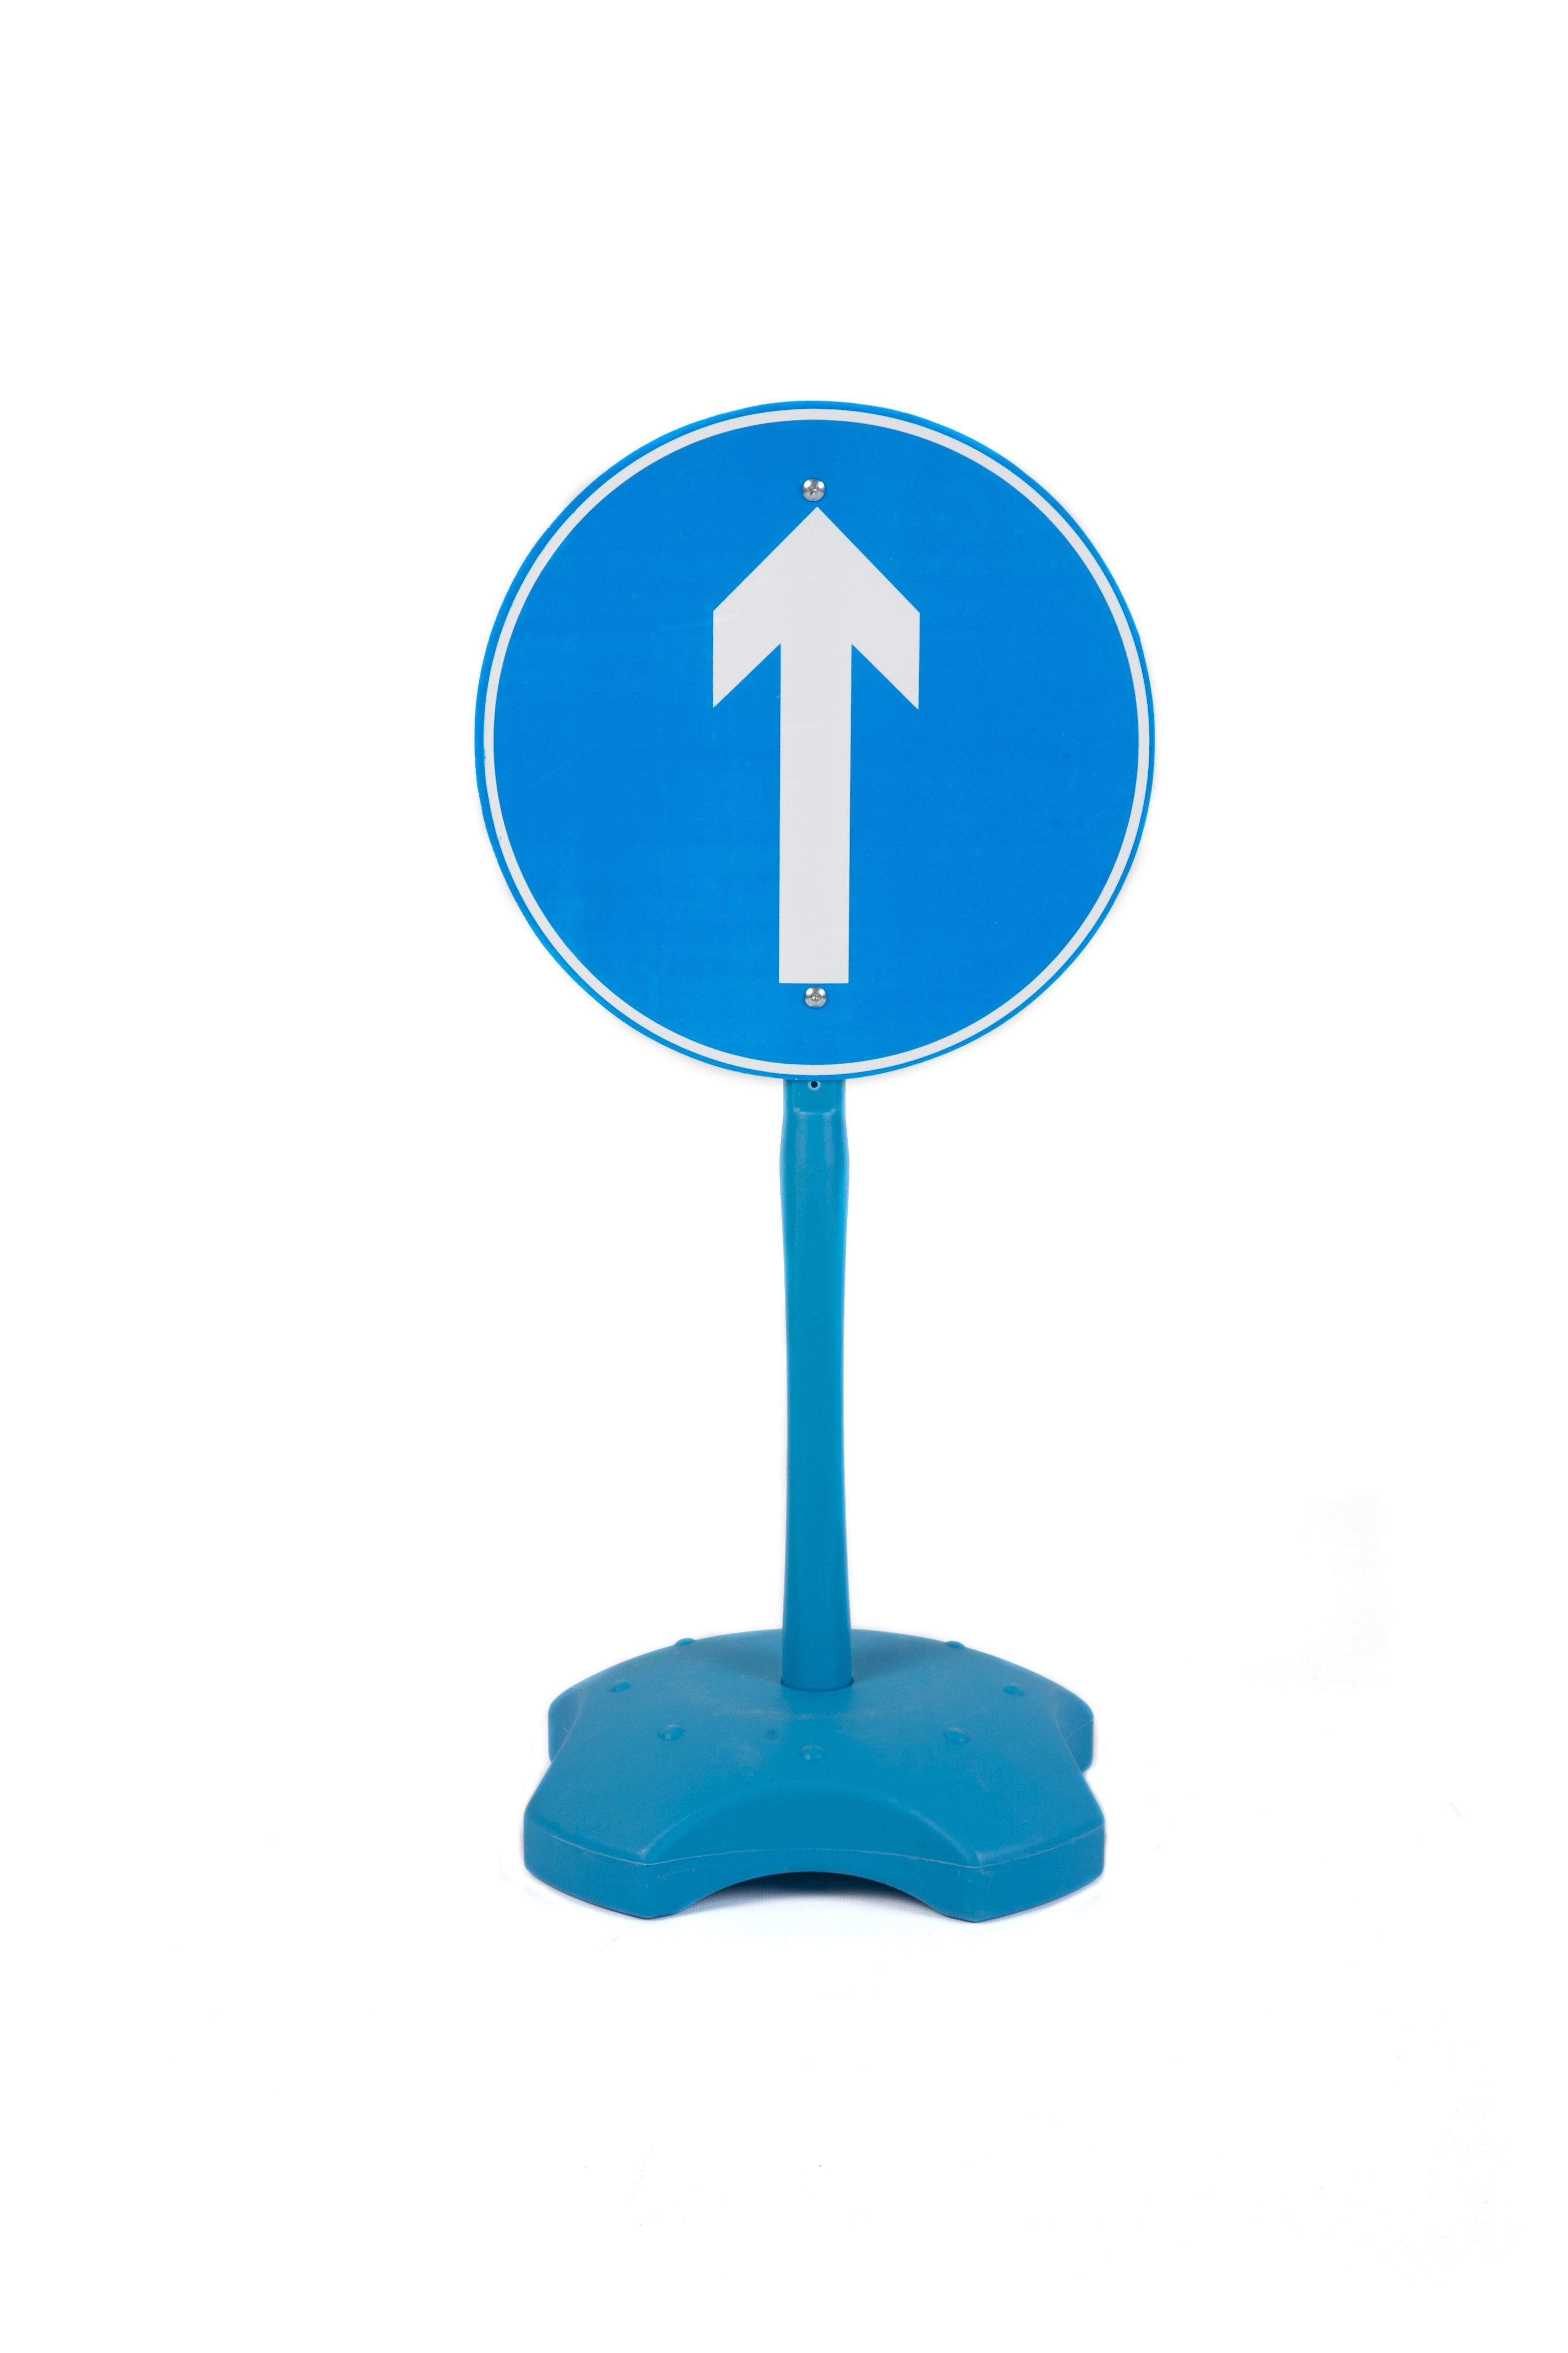 Where to Buy Stand-up One Way Only Kids Traffic Road Sign a Good ...